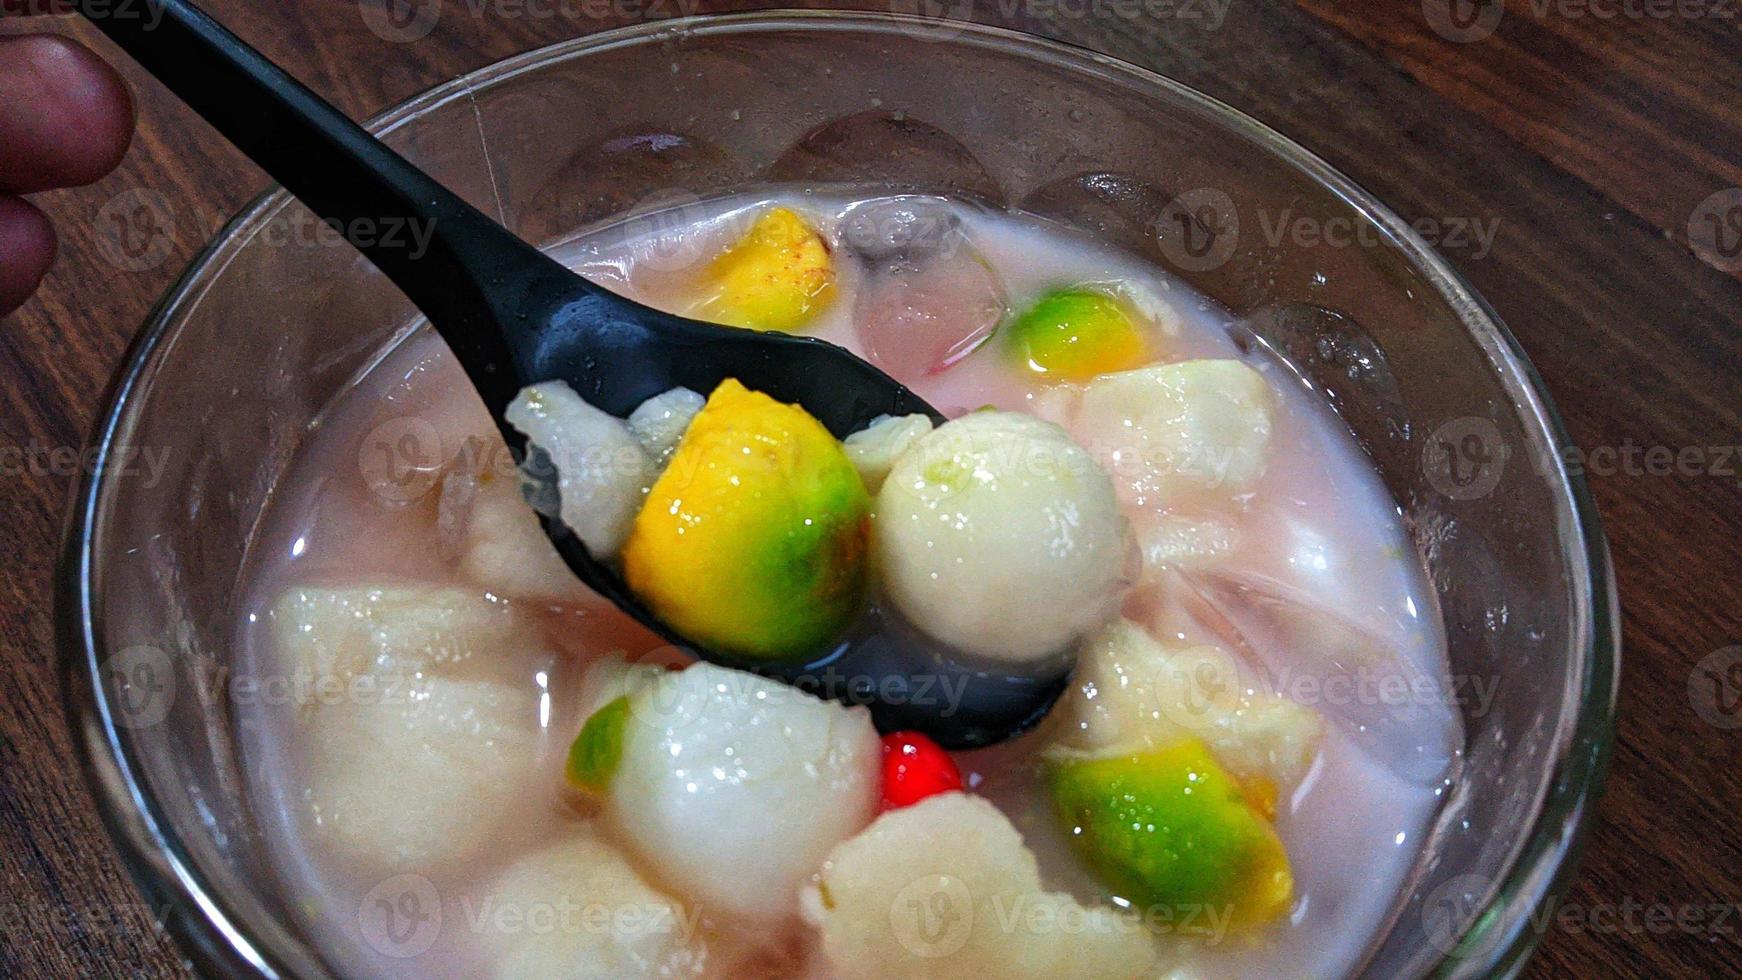 Cianjur Regency, West Java, Indonesia on April 7, 2022 - Fruit Sop which is usually a complementary drink. photo